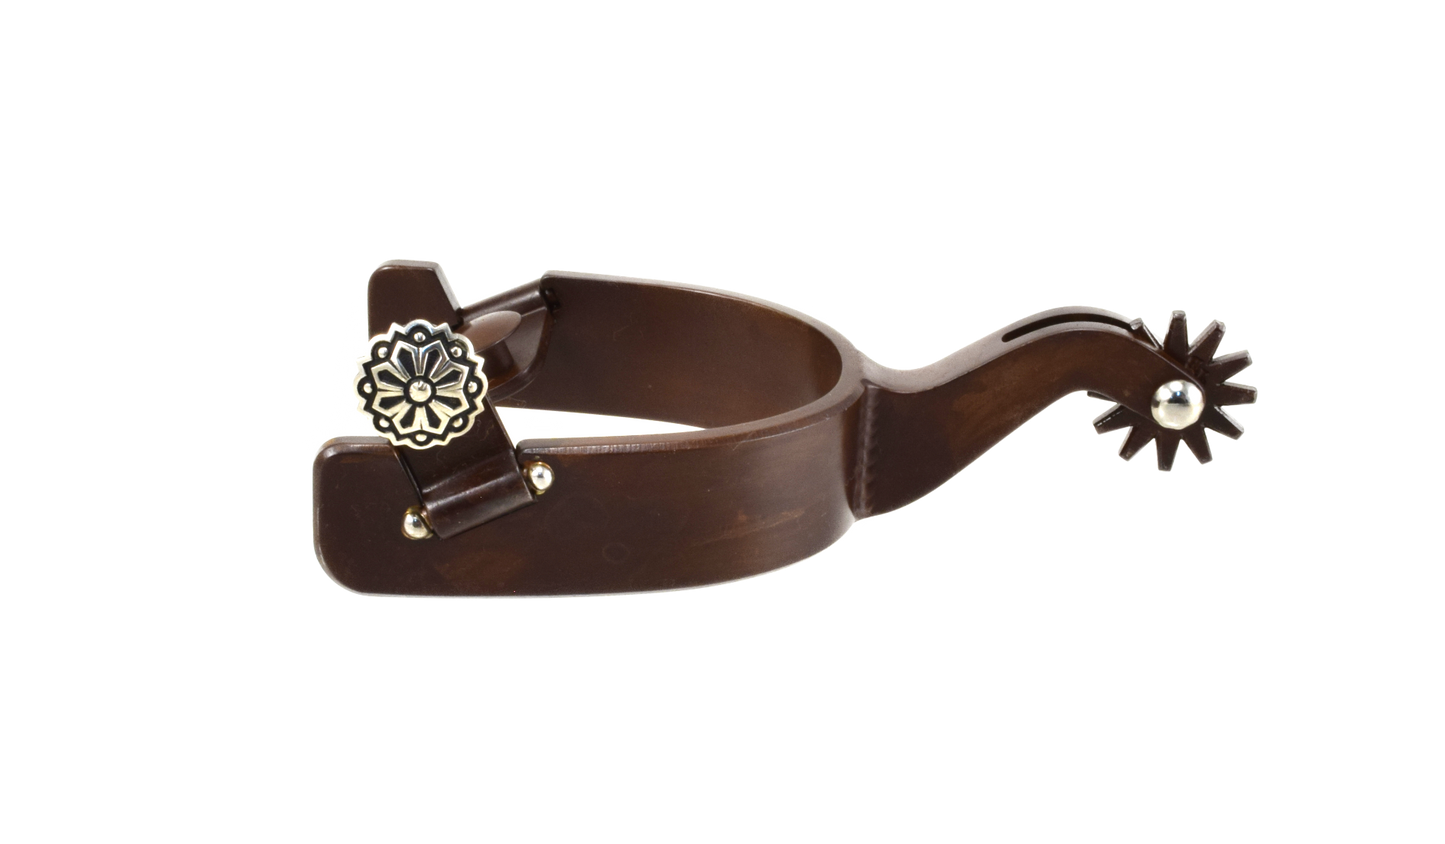 Spur #11 Texas Style Band with Brown Finish